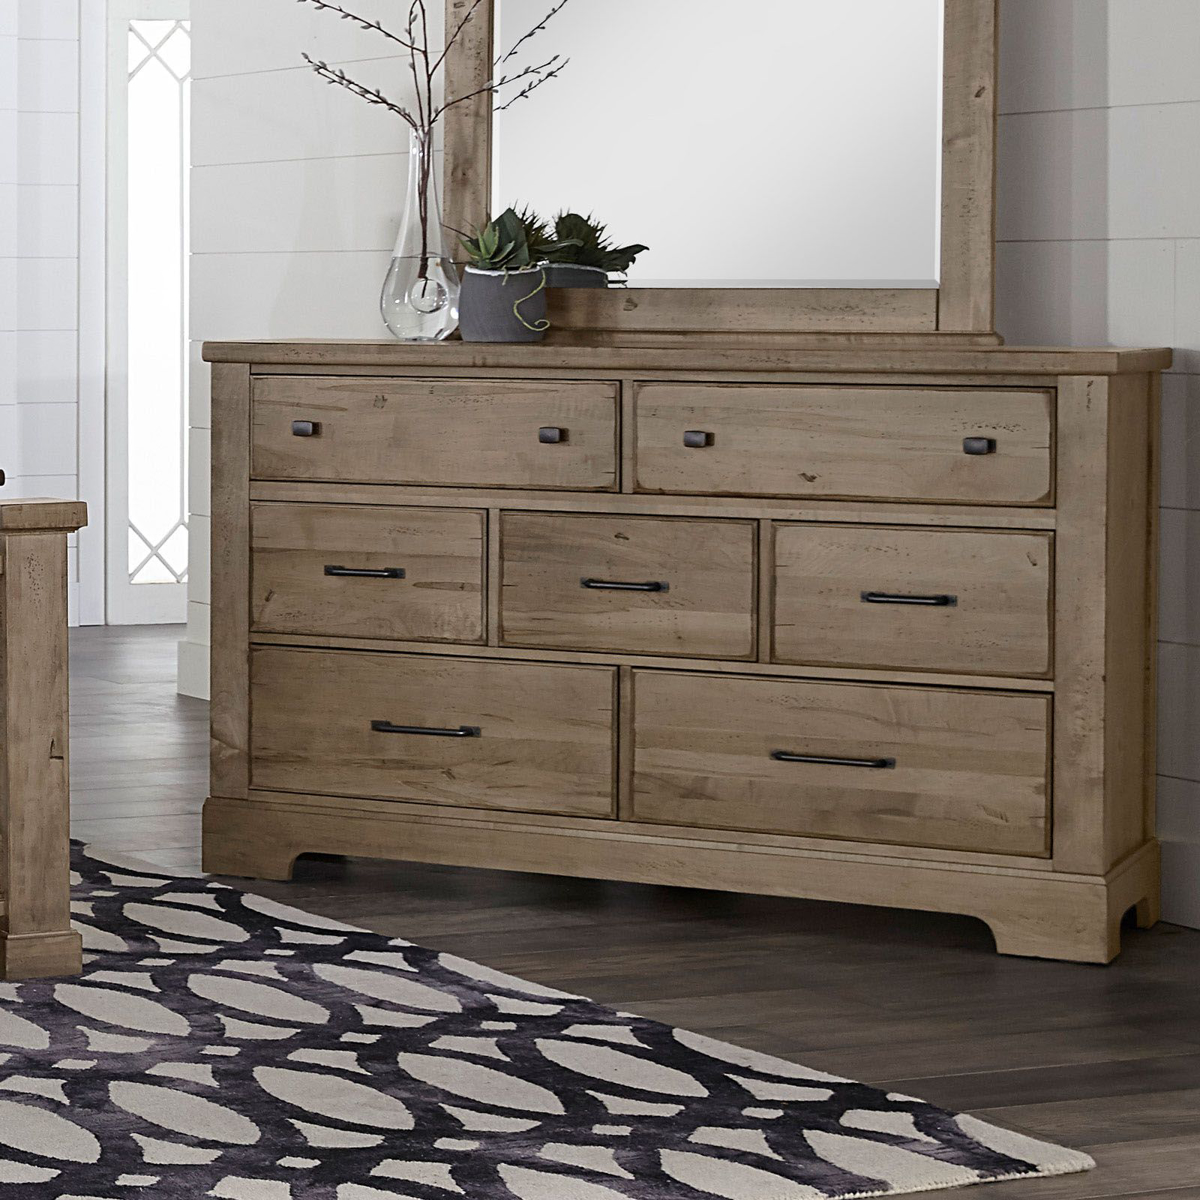 Picture of Cool Rustic Seven Drawer Dresser